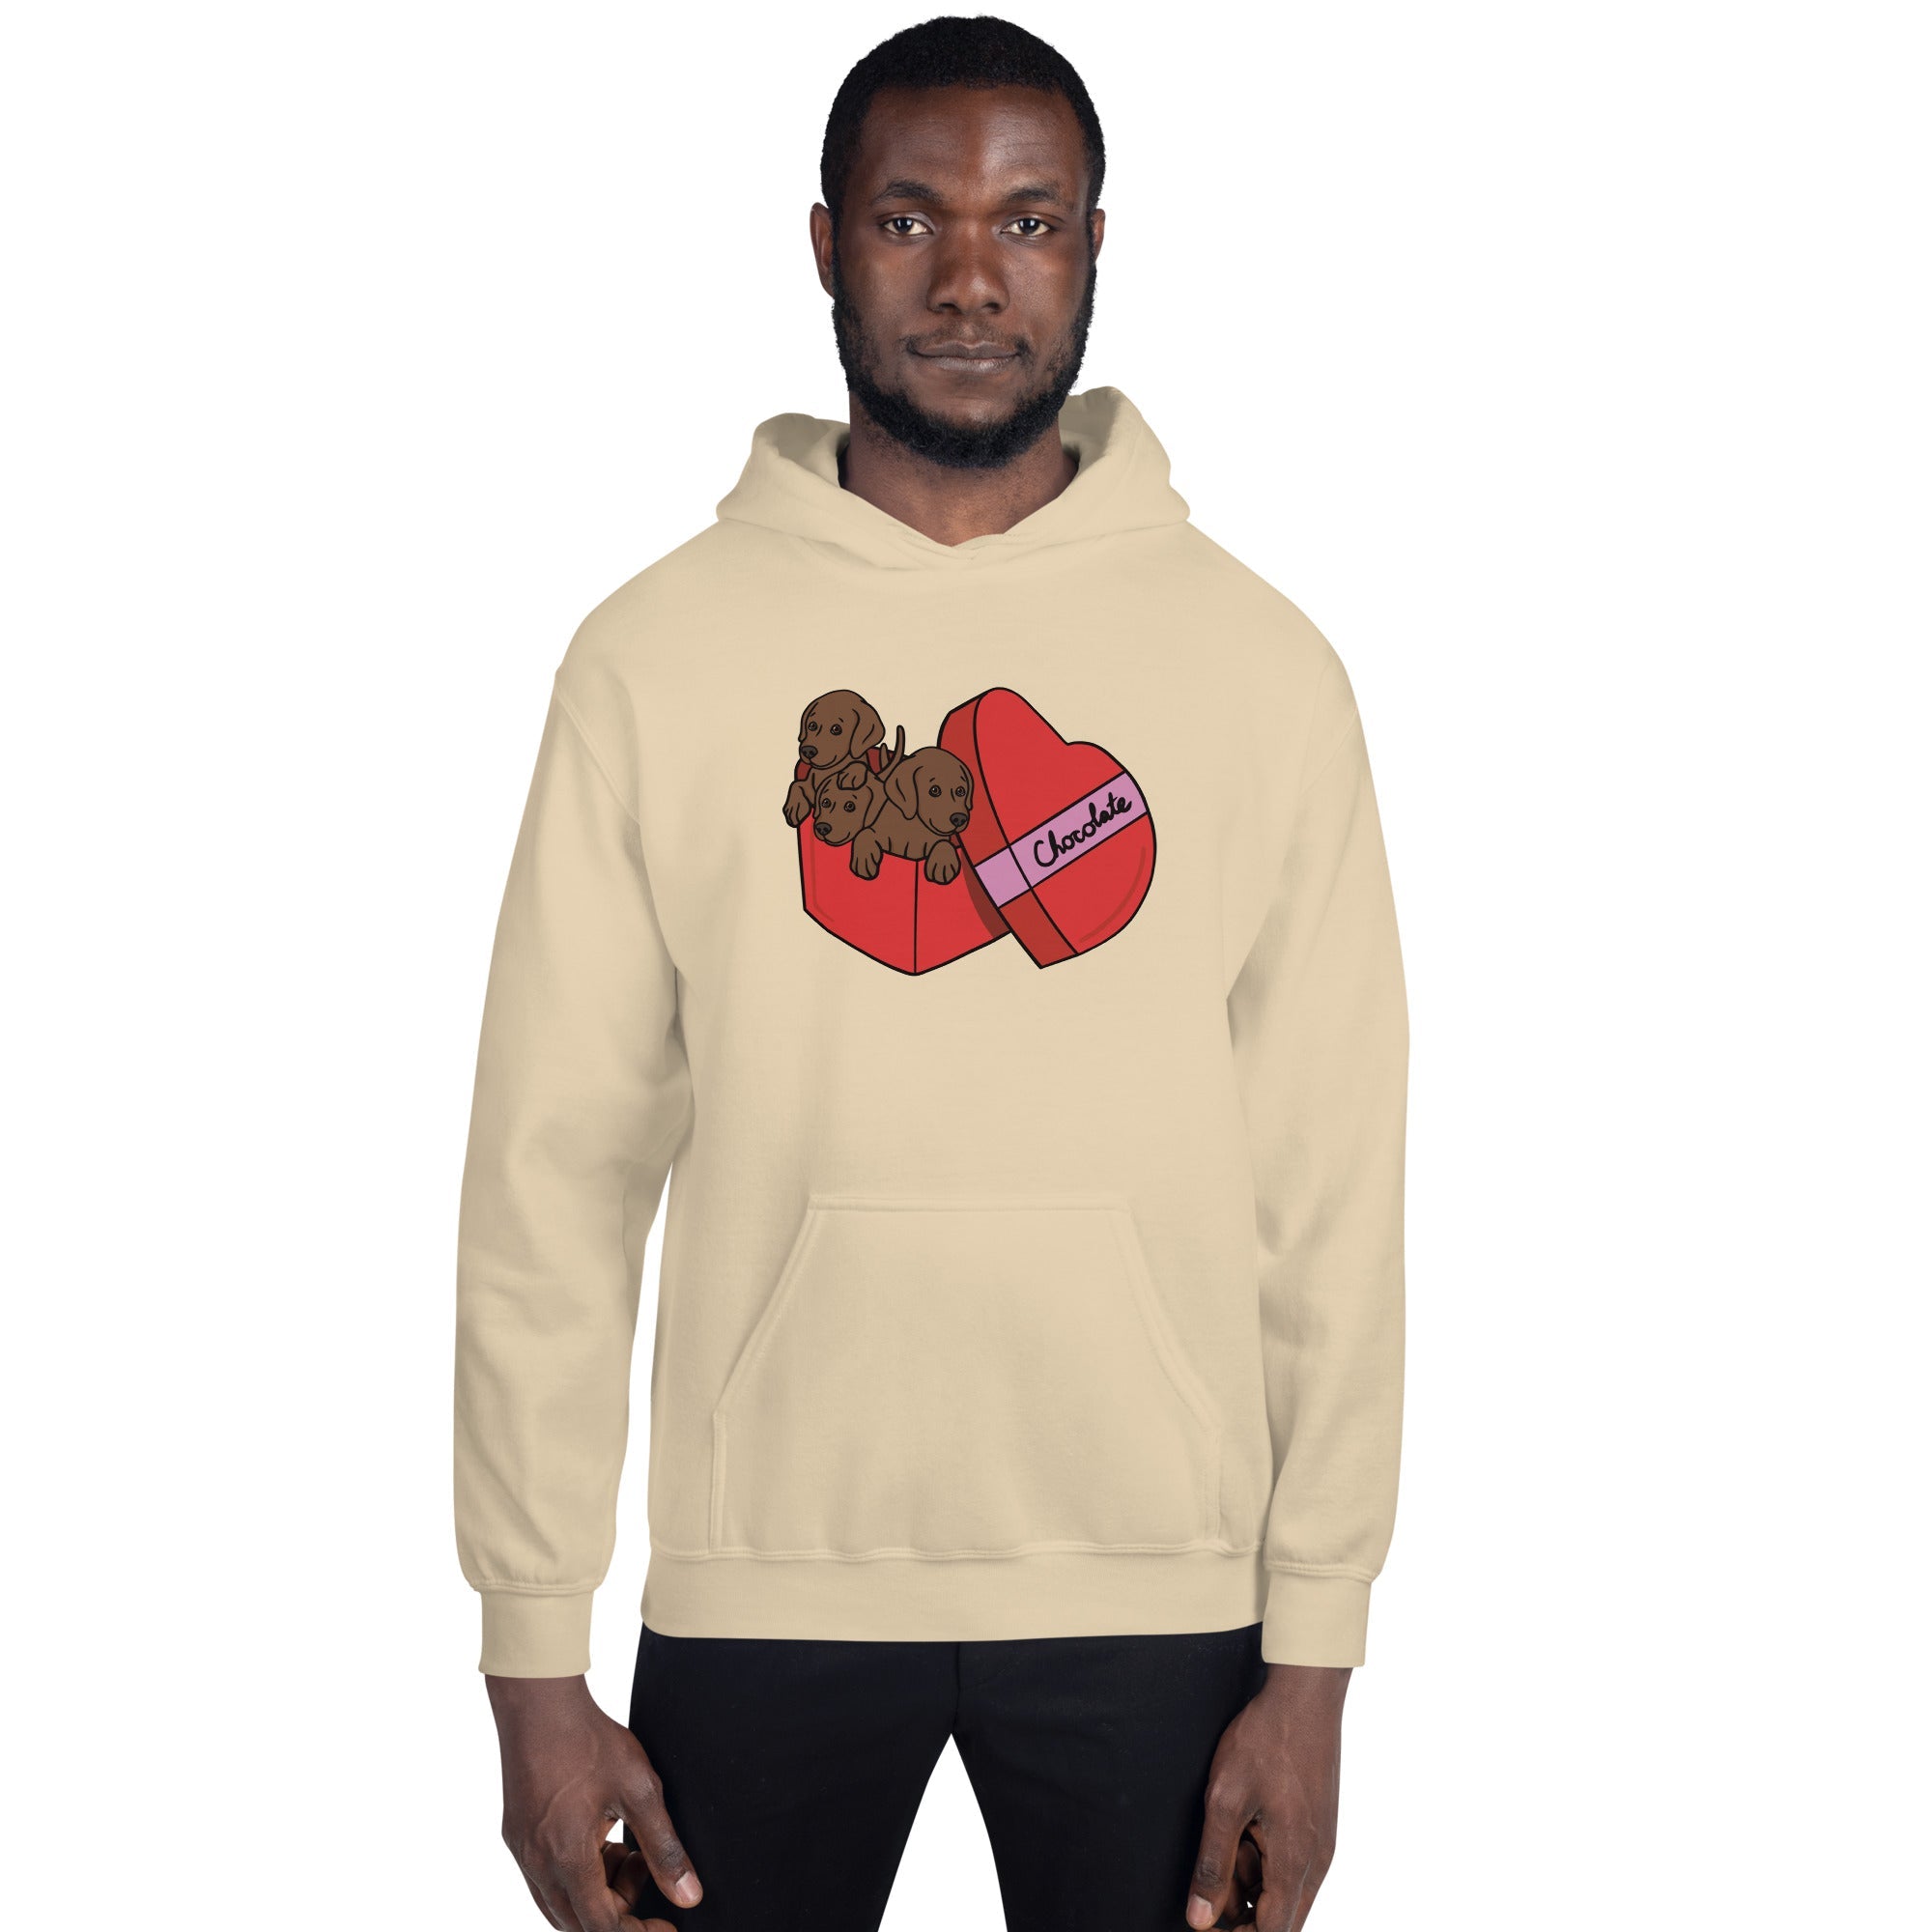 Box of Chocolates Hoodie - TAILWAGS UNLIMITED